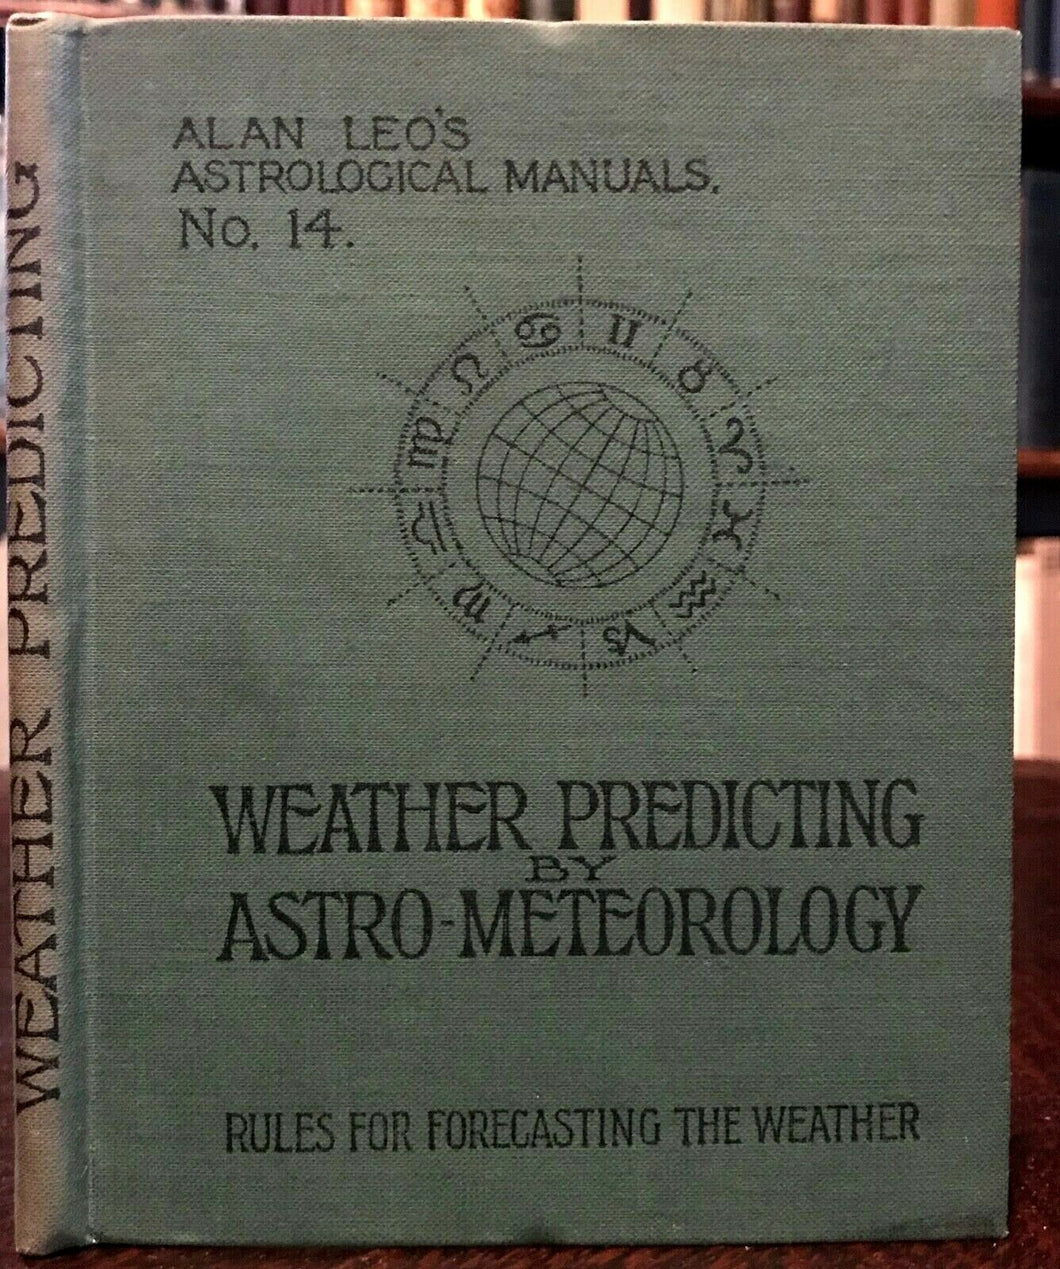 ALAN LEO - WEATHER PREDICTING BY ASTRO-METEOROLOGY, No. 14 - OCCULT ZODIAC, 1912